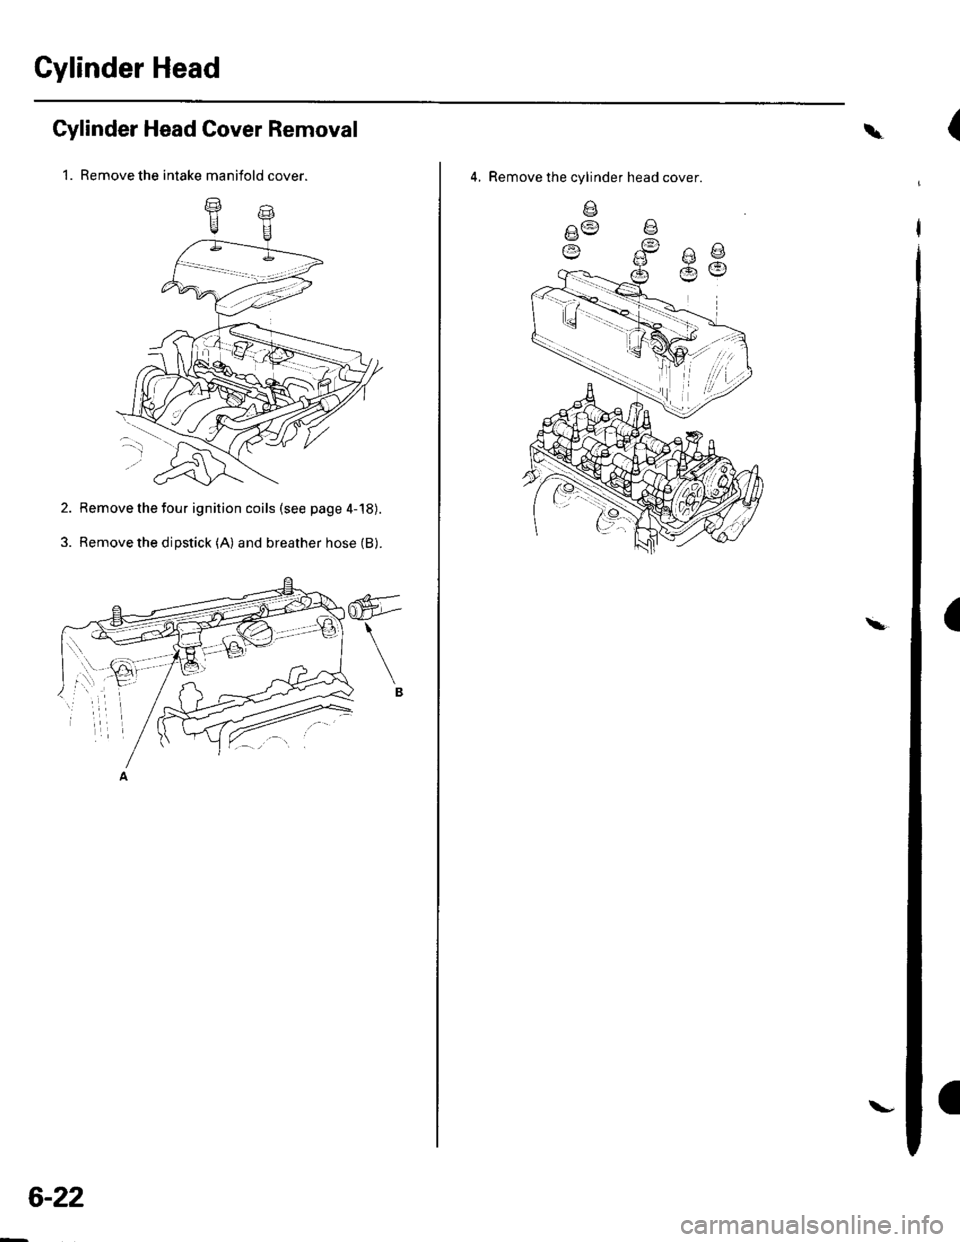 HONDA CIVIC 2003 7.G Owners Manual Gylinder Head
Cylinder Head Cover Removal
1. Remove the intake manifold cover.
2. Remove the four ignition coils (see page 4-18).
3. Remove the dipstick (A) and breather hose (B).
6-22
\-
\
4, Remove